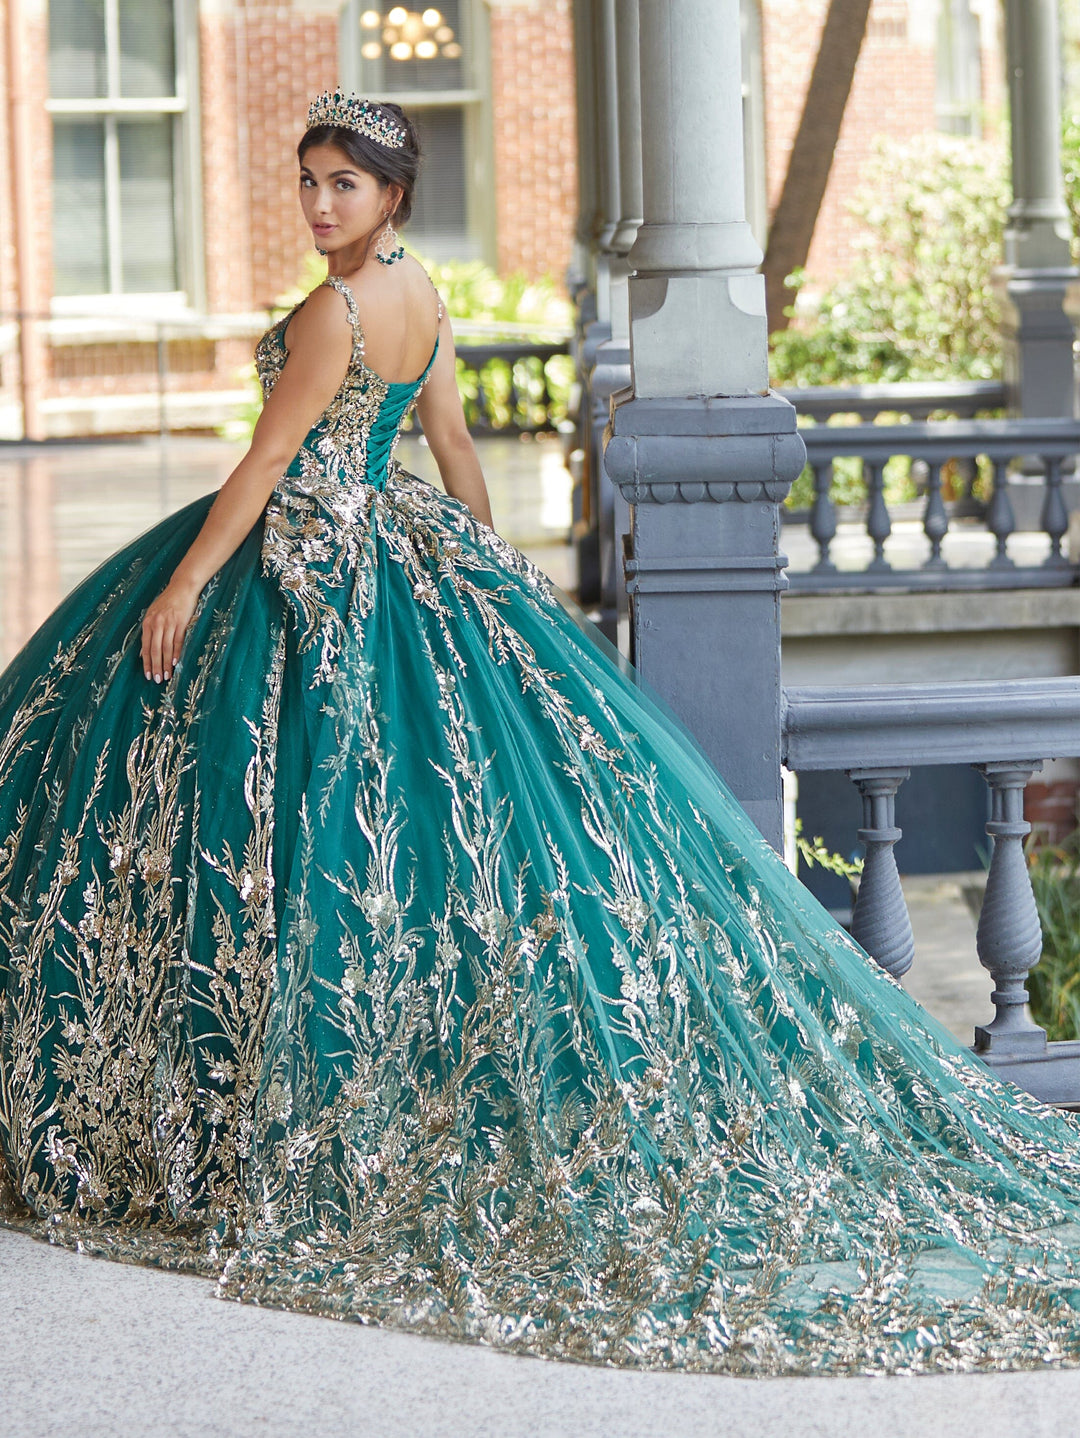 Applique Sleeveless Quinceanera Dress by House of Wu 26050